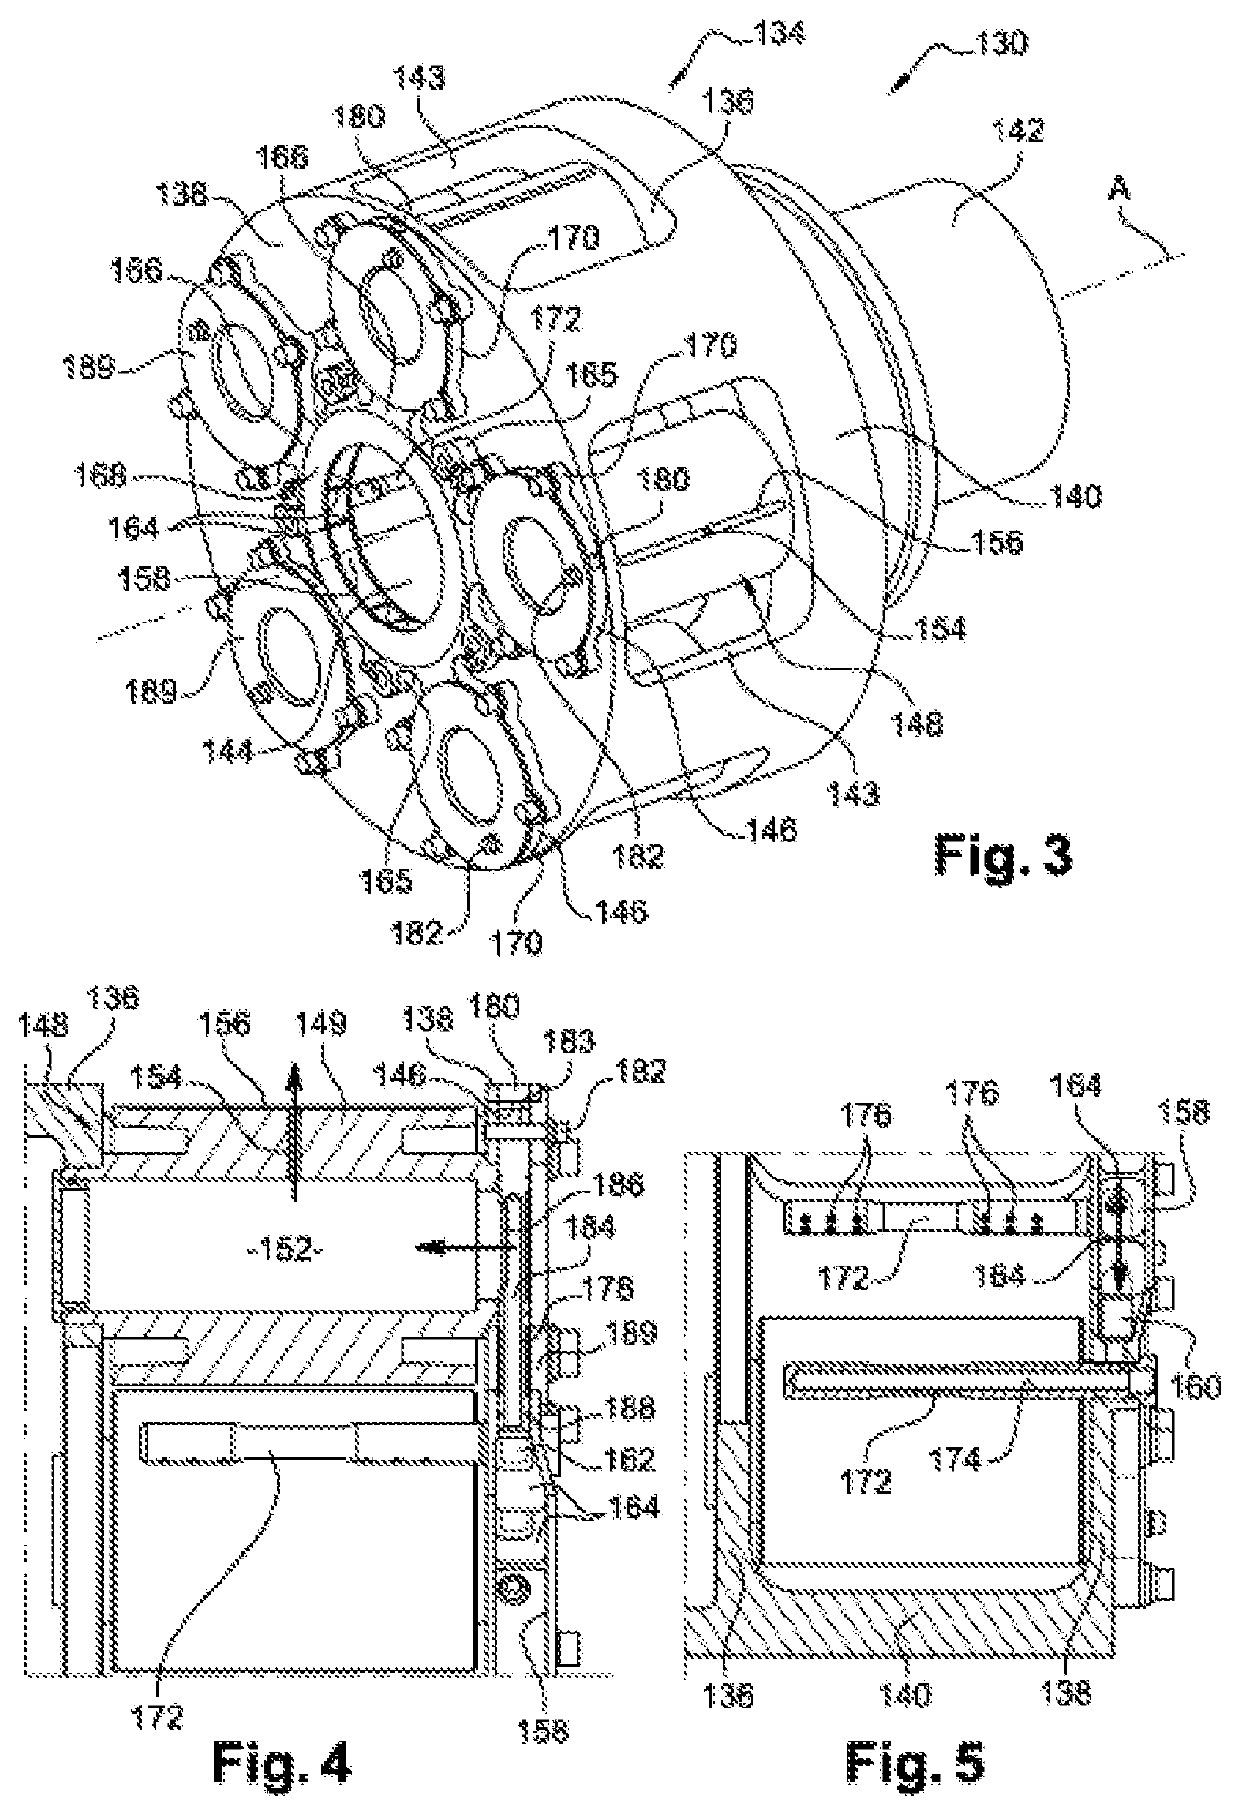 Cage planet carrier for a speed-reducing unit with an epicyclic gear train